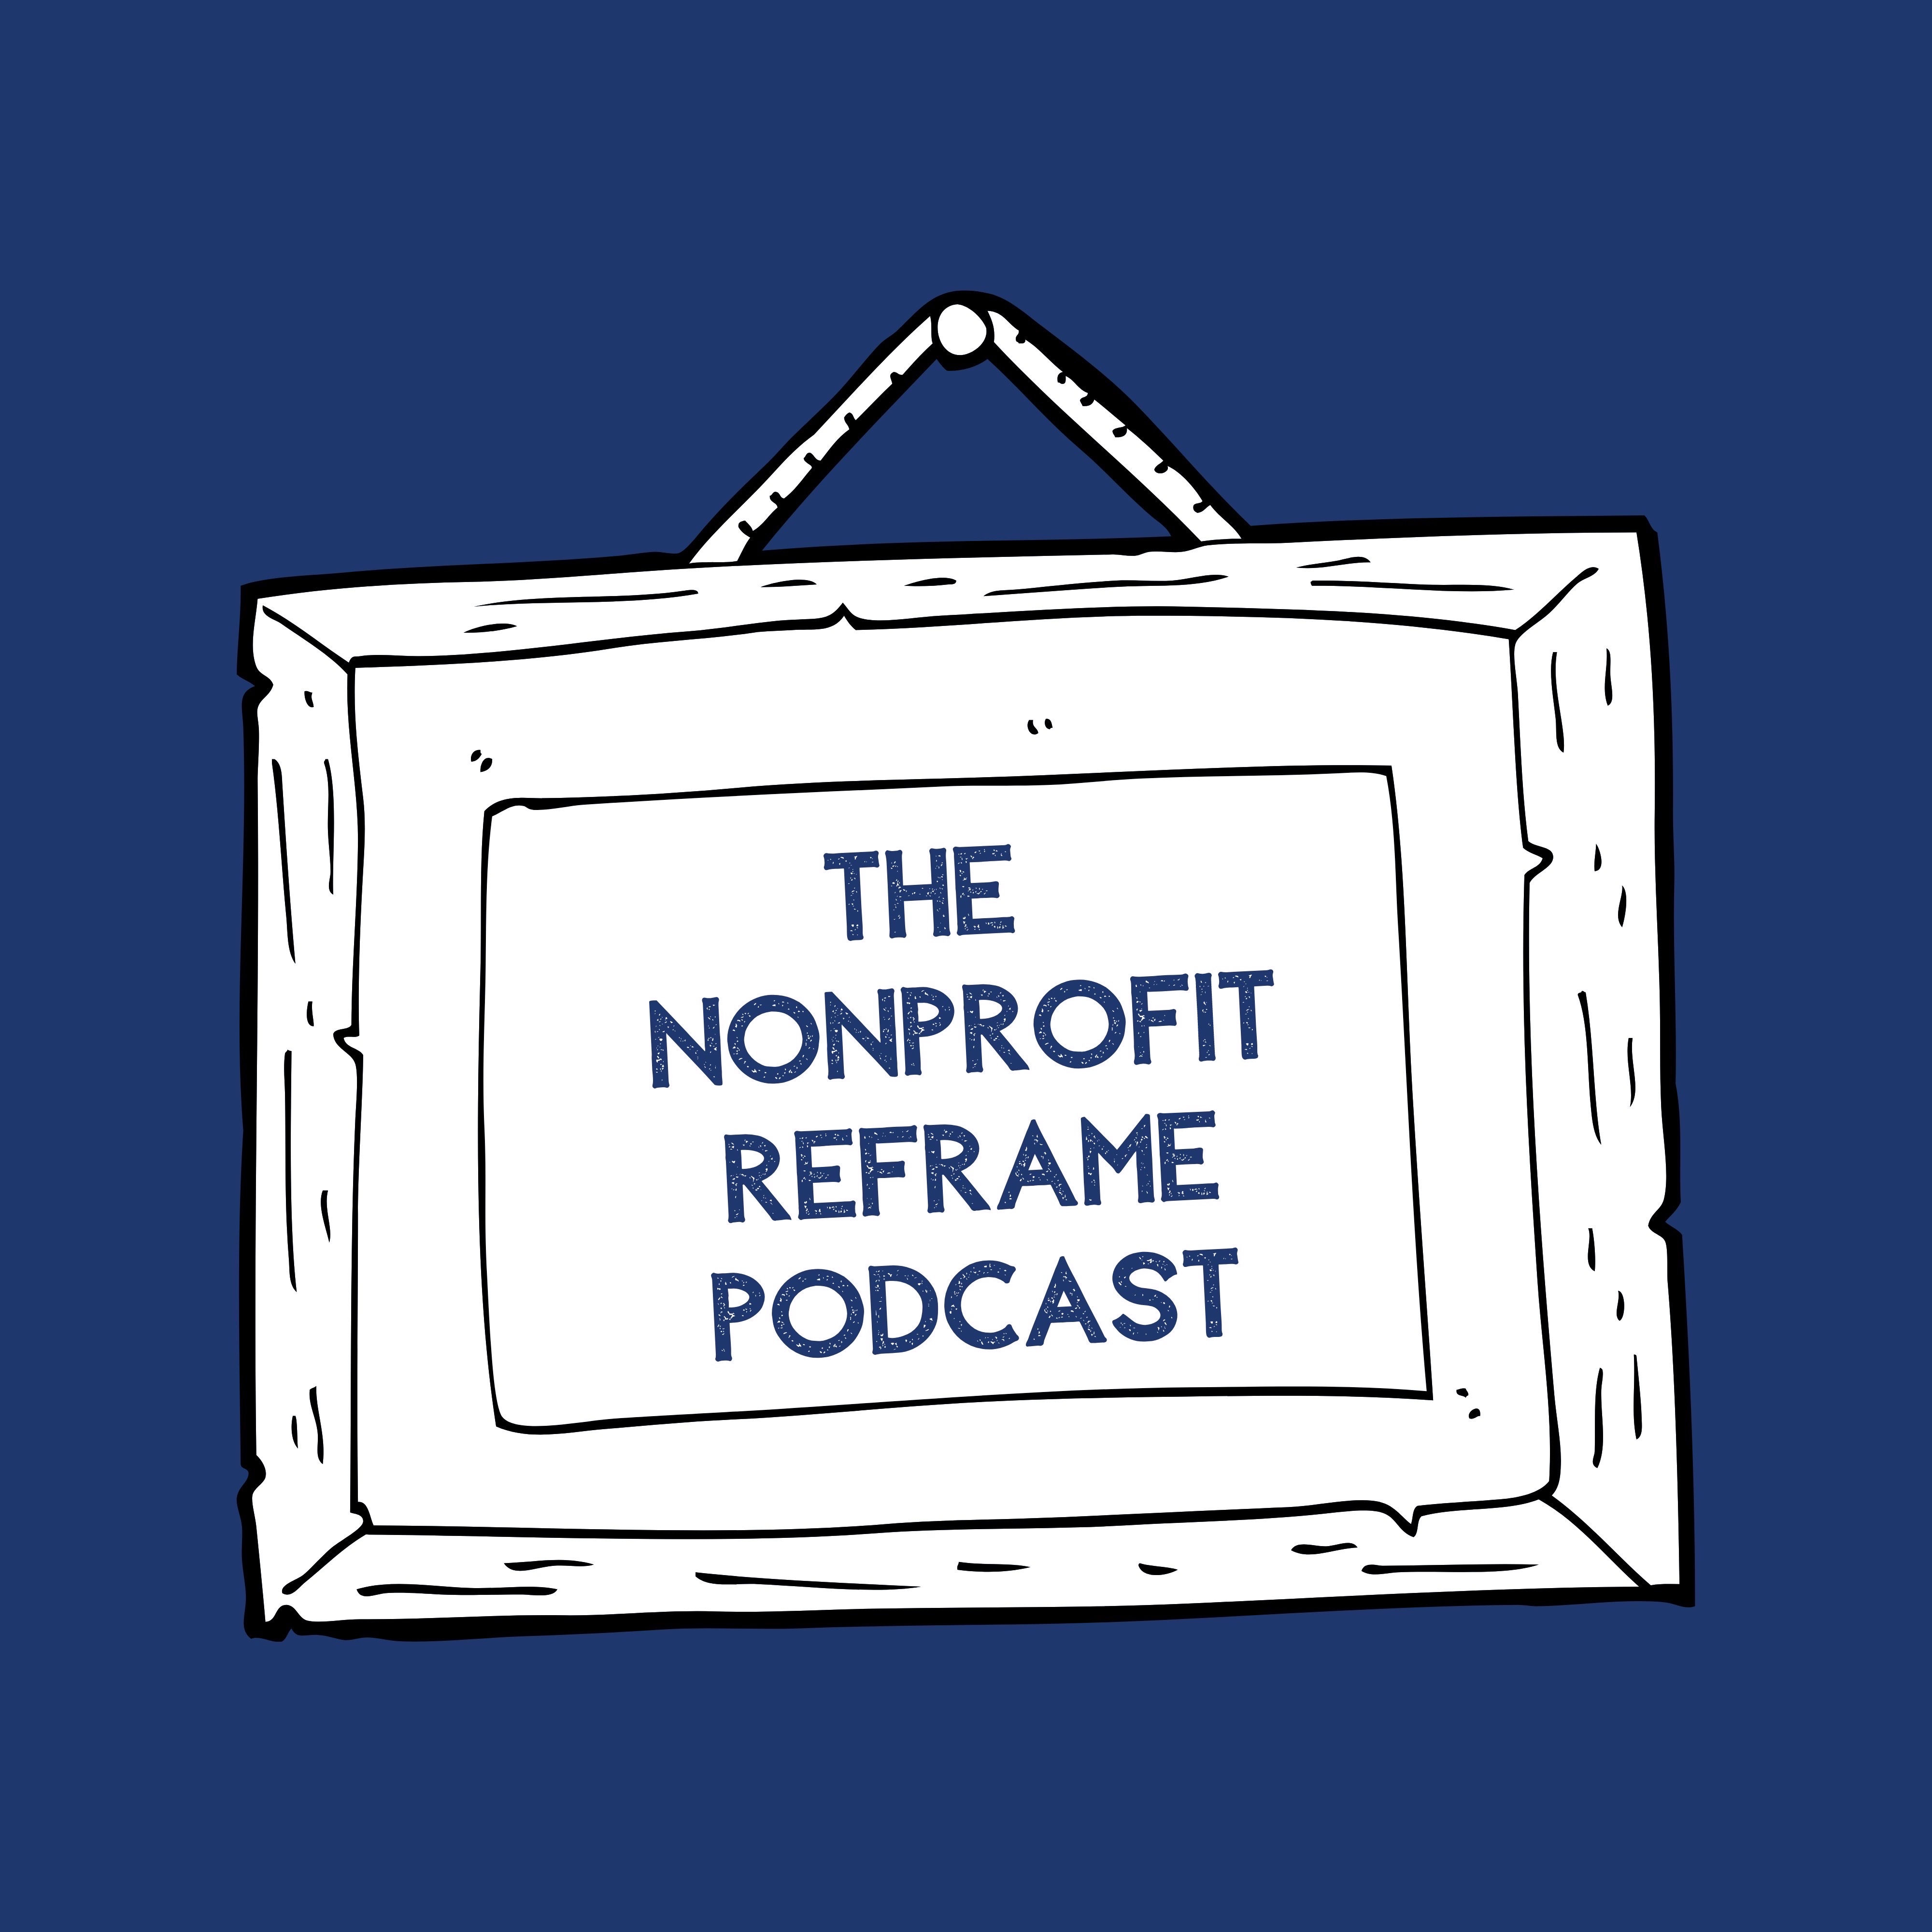 The Nonprofit Reframe Podcast